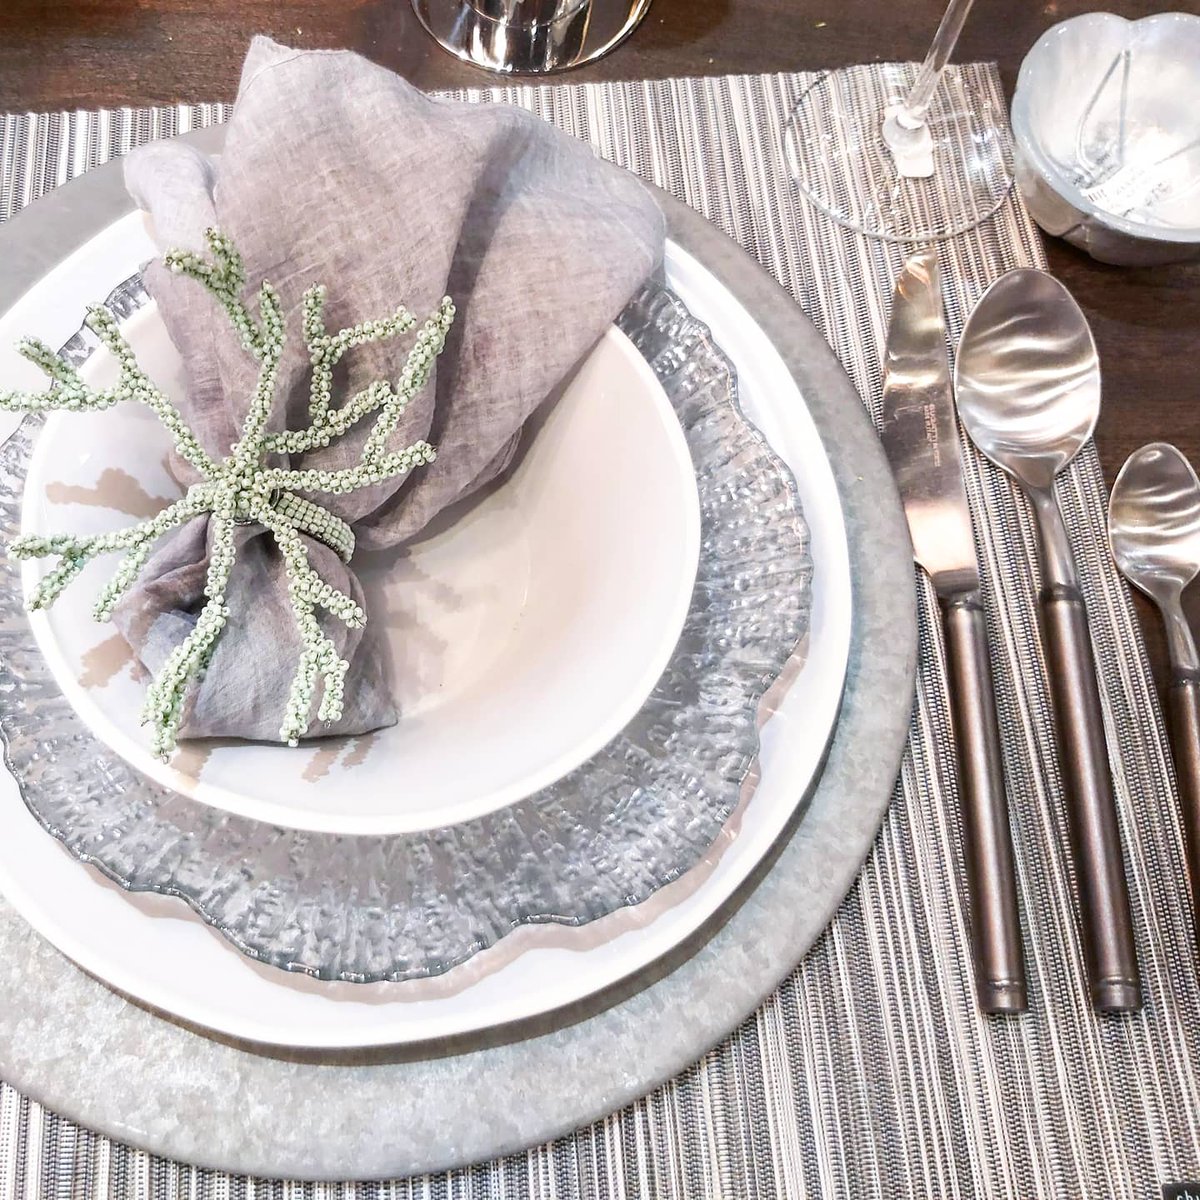 Succulents and the natural tones of grapevine bring just the right amount of warmth to the grey. They pair exceptionally well with our tin accents. #tablesettingideas #kelownadecor #kelownahome #centrepieceideas